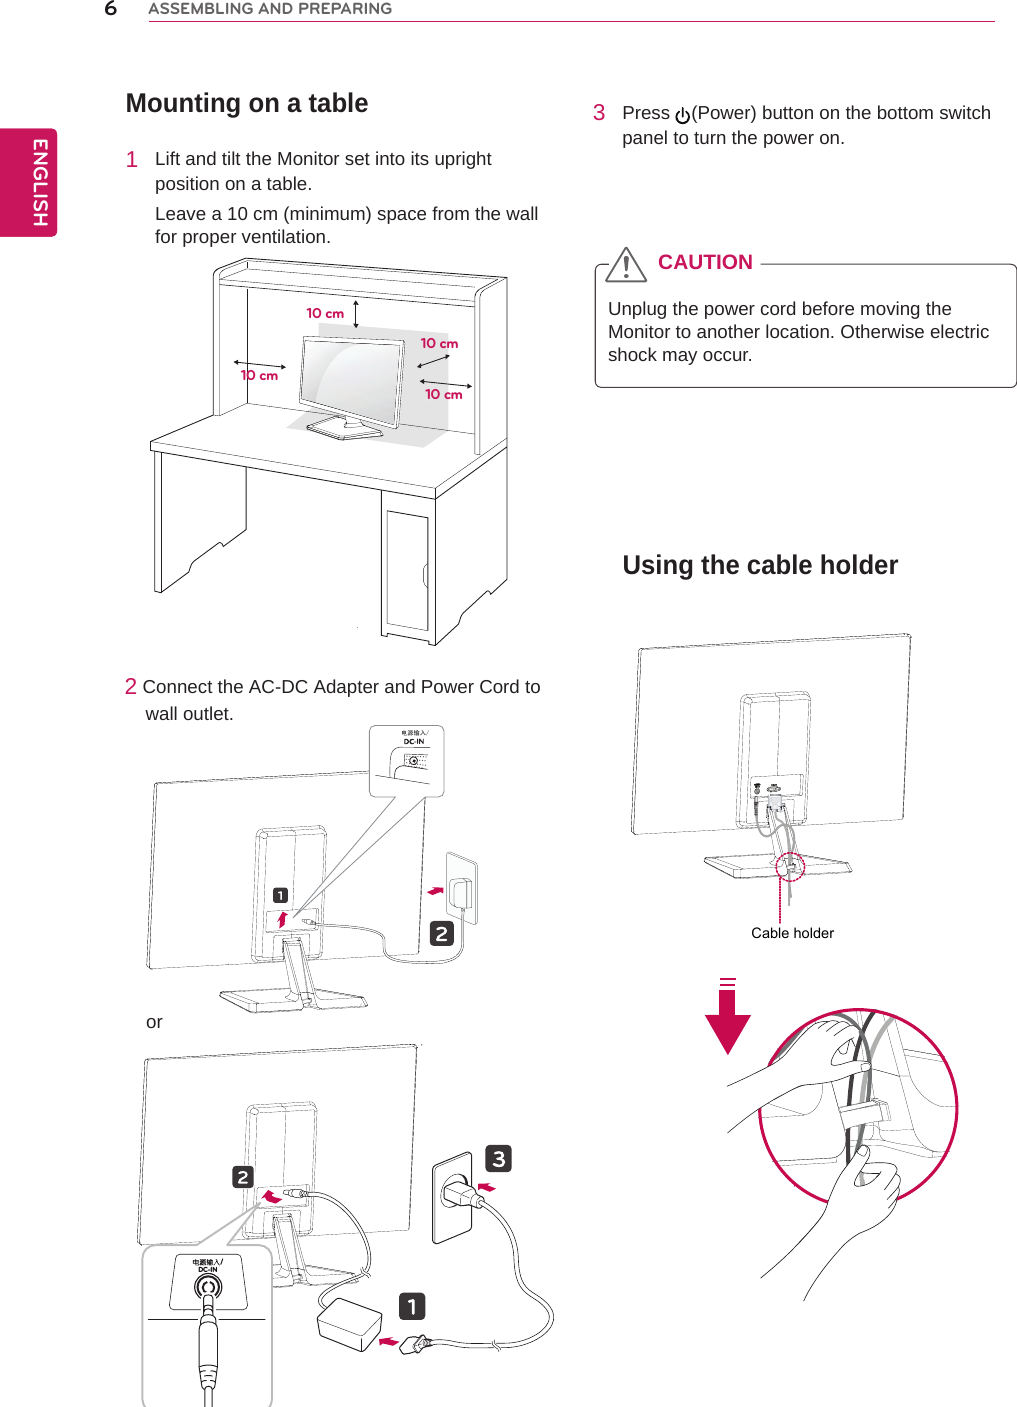 Mounting on a table1  Lift and tilt the Monitor set into its upright position on a table.Leave a 10 cm (minimum) space from the wall for proper ventilation.2 Connect the AC-DC Adapter and Power Cord to     wall outlet.3  Press  (Power) button on the bottom switch panel to turn the power on.Unplug the power cord before moving the Monitor to another location. Otherwise electric shock may occur.CAUTION10 cm10 cm10 cm10 cmUsing the cable holder6ENGENGLISHASSEMBLING AND PREPARING电源输入/DC-IN /orCable holder